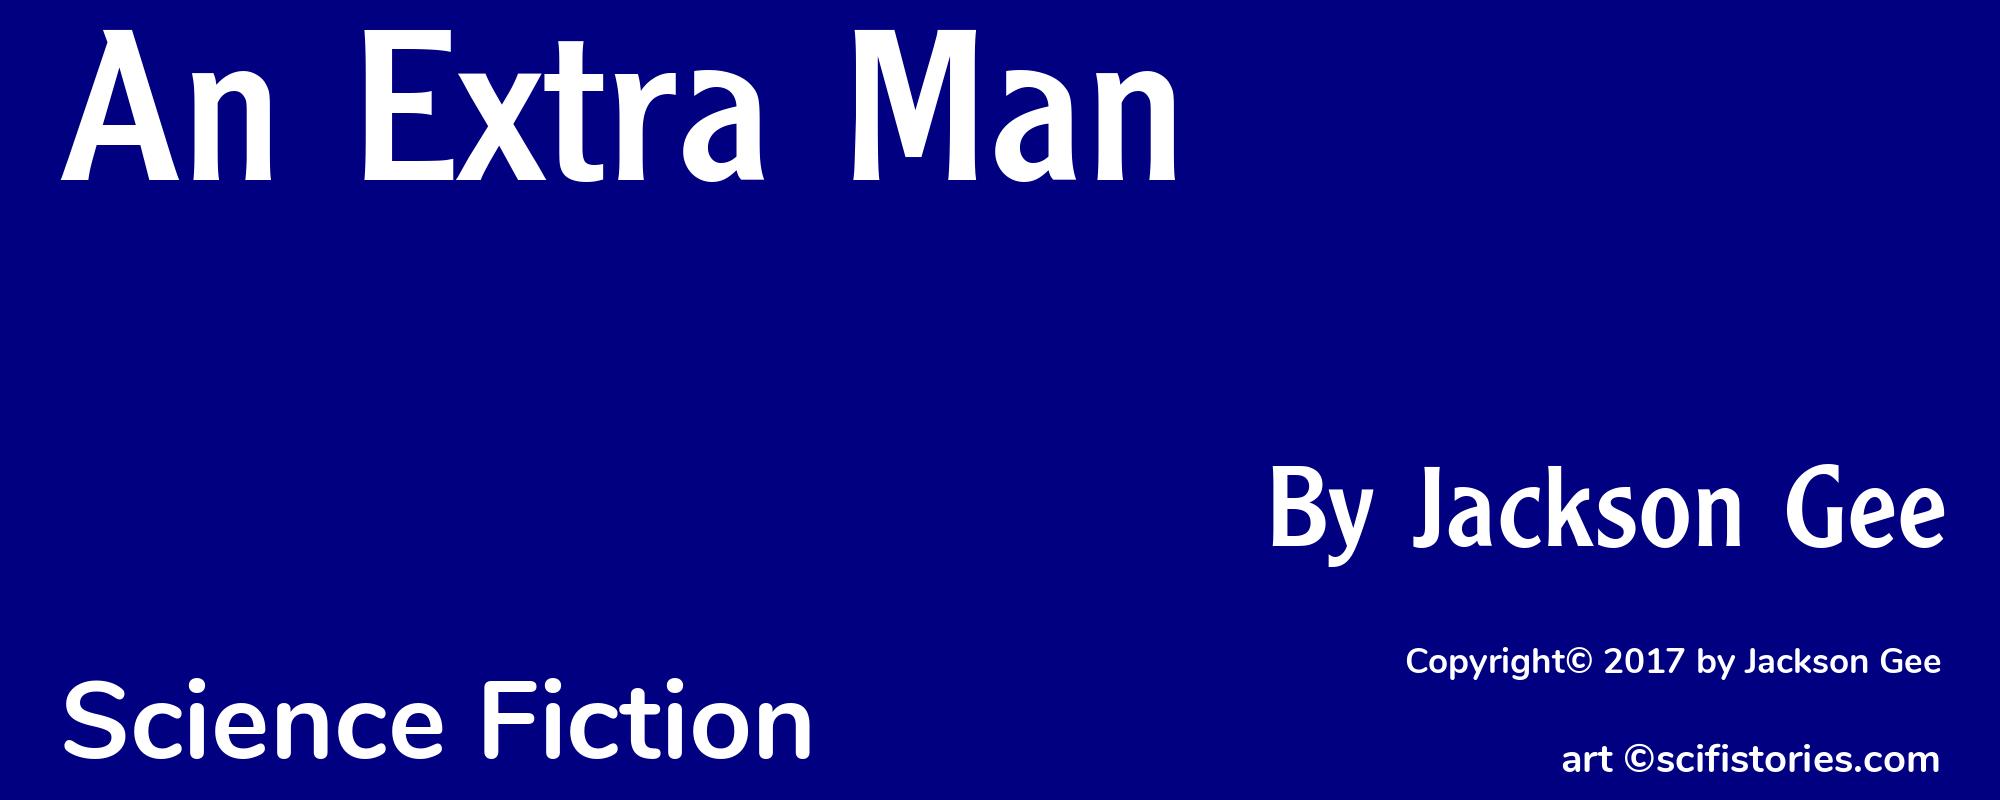 An Extra Man - Cover